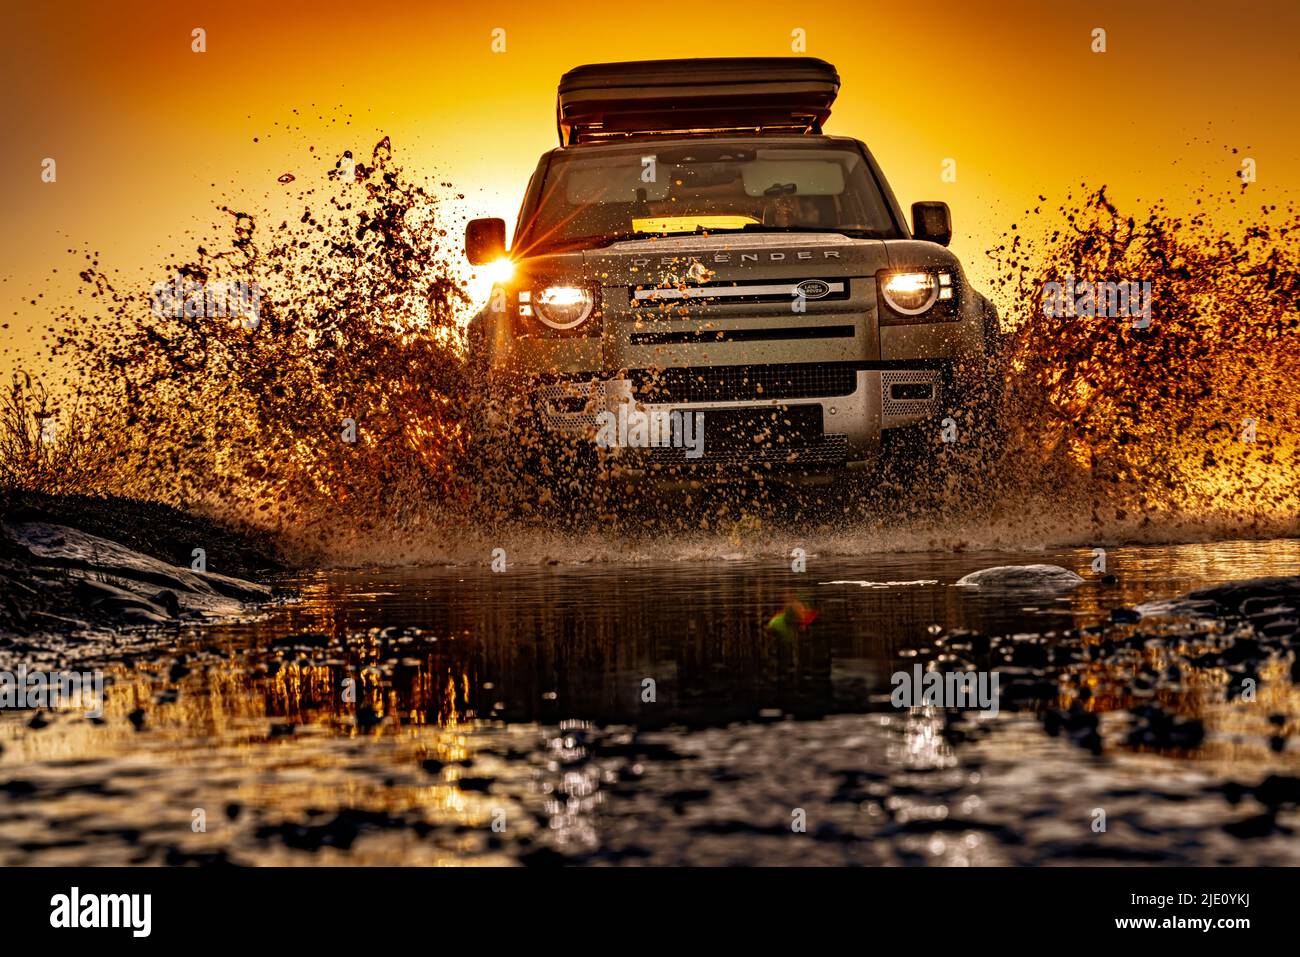 Rybachy, RUSSIA - May 30 2022: Off-roading New Land Rover Defender. The Land Rover Defender is a series of British off-road cars and pick-up trucks. Stock Photo